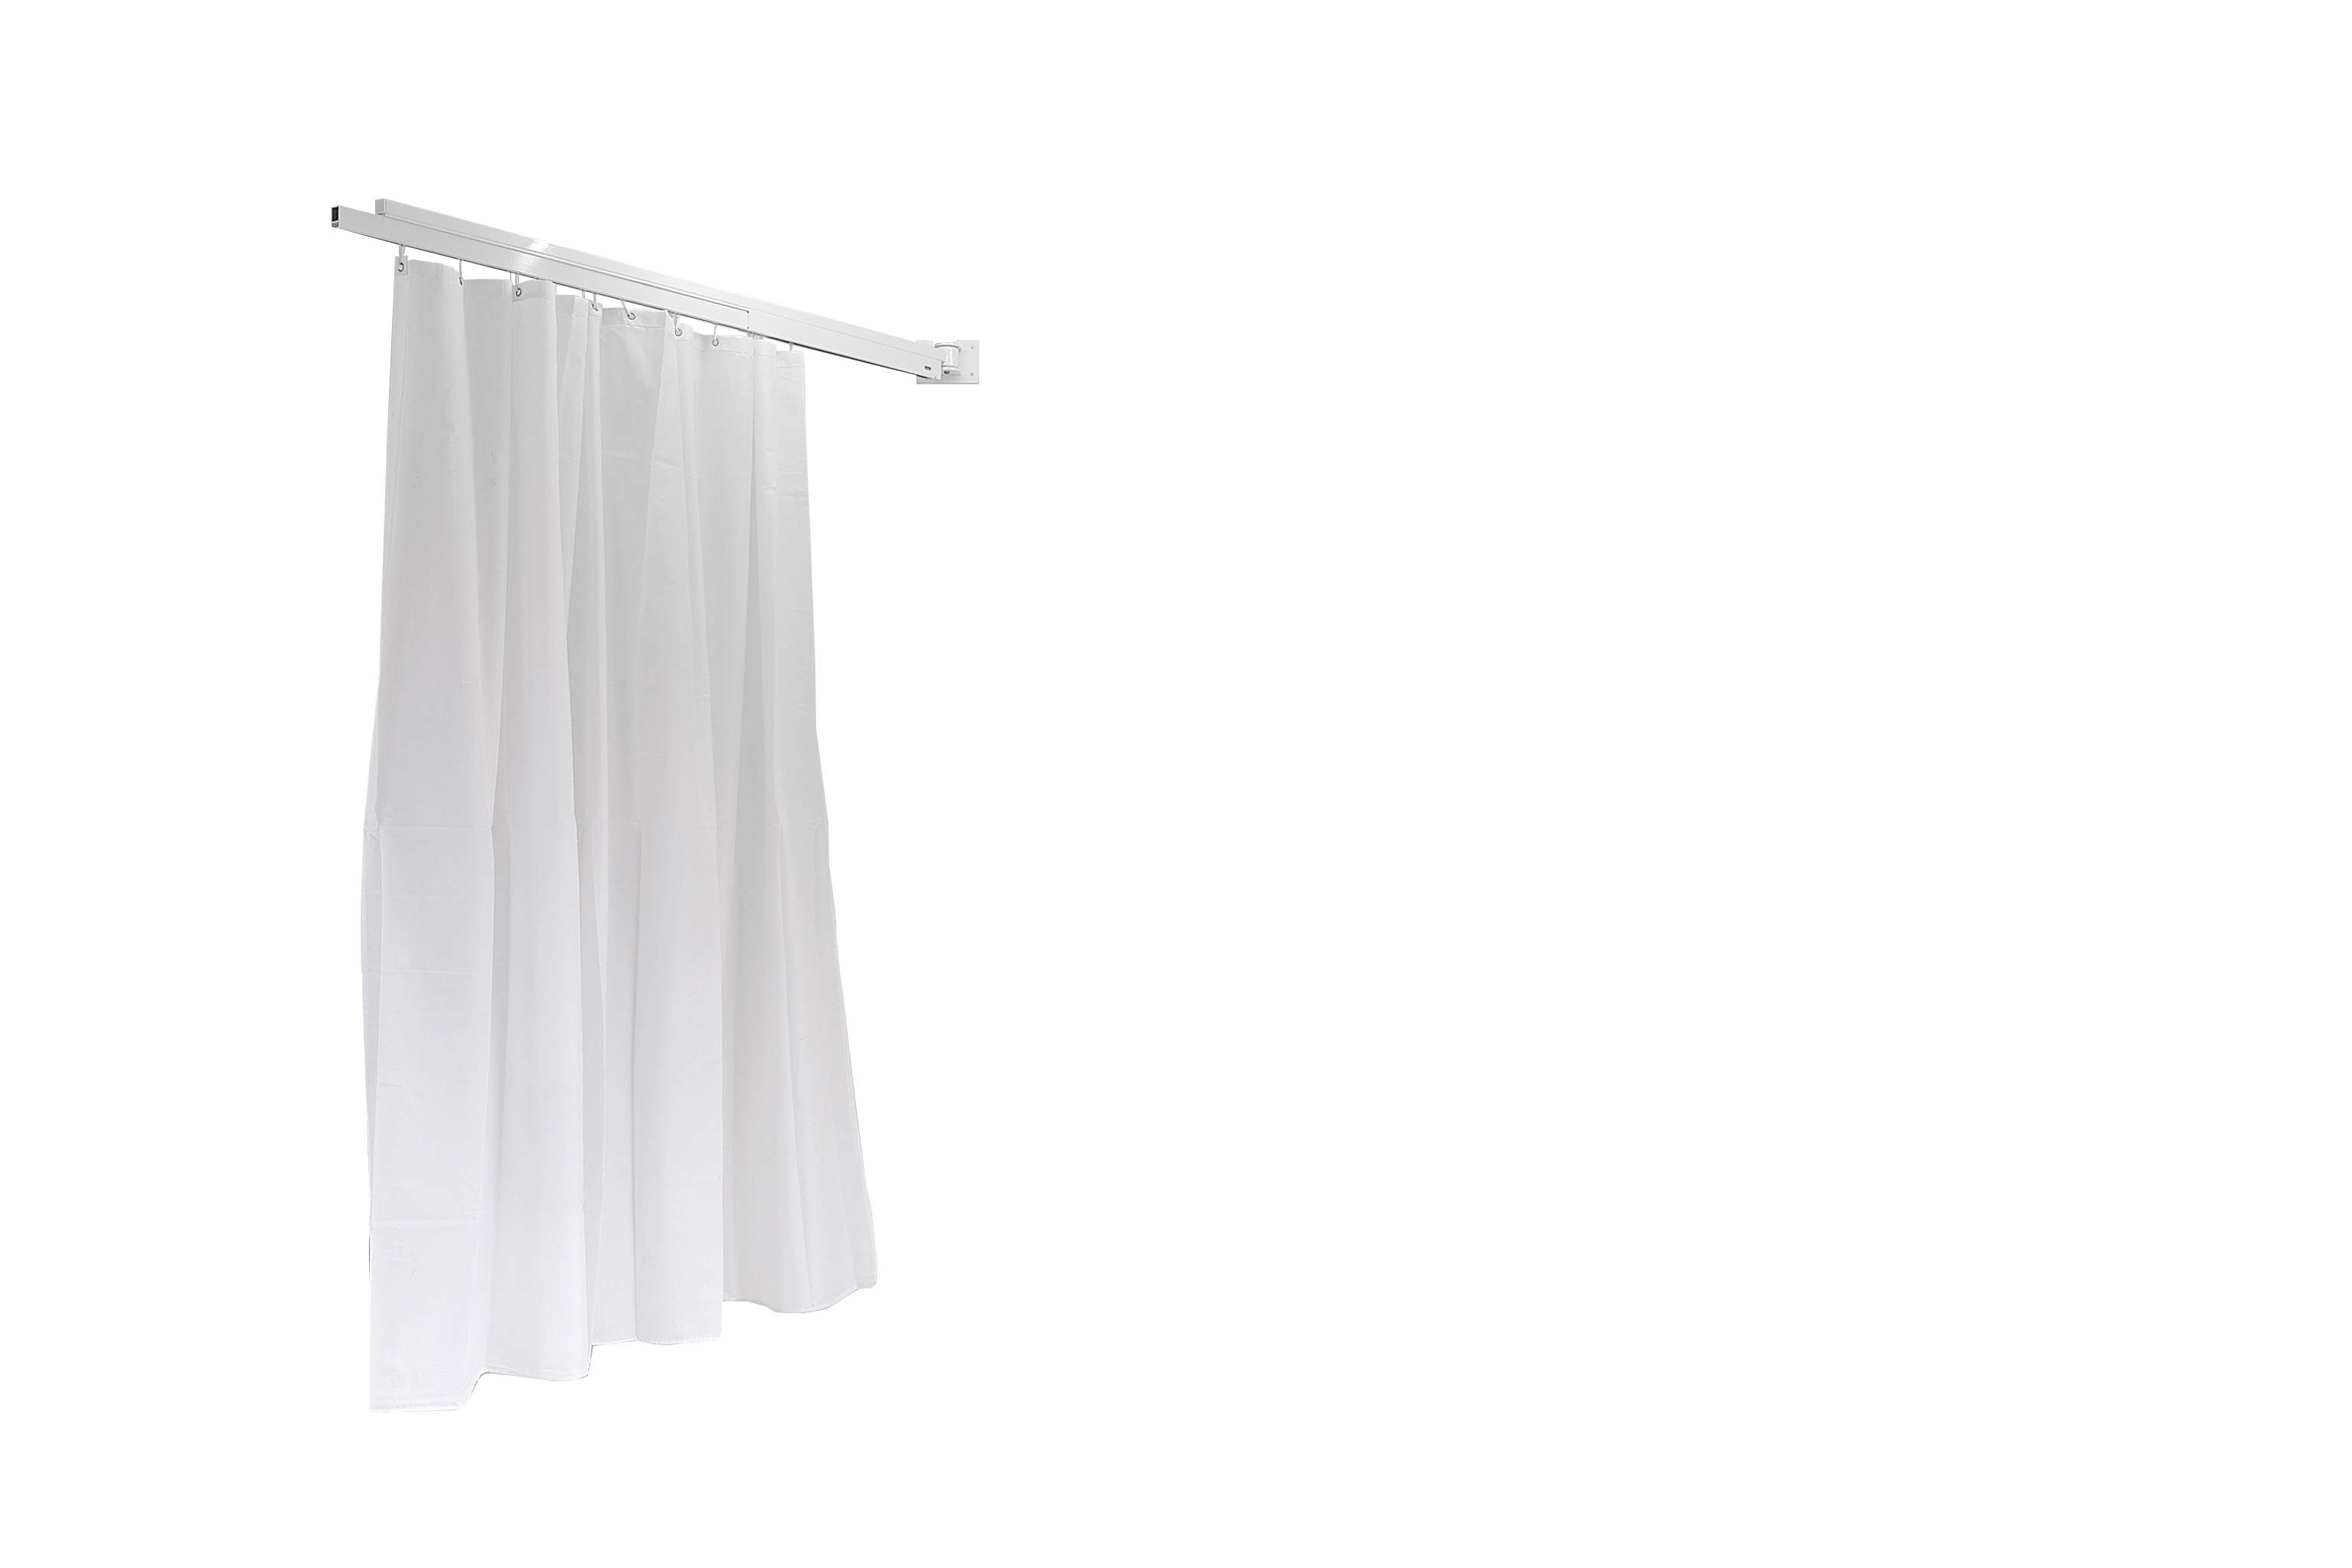 Hospital Curtain Track System Medical, Ceiling Mounted Shower Curtain Track Australia